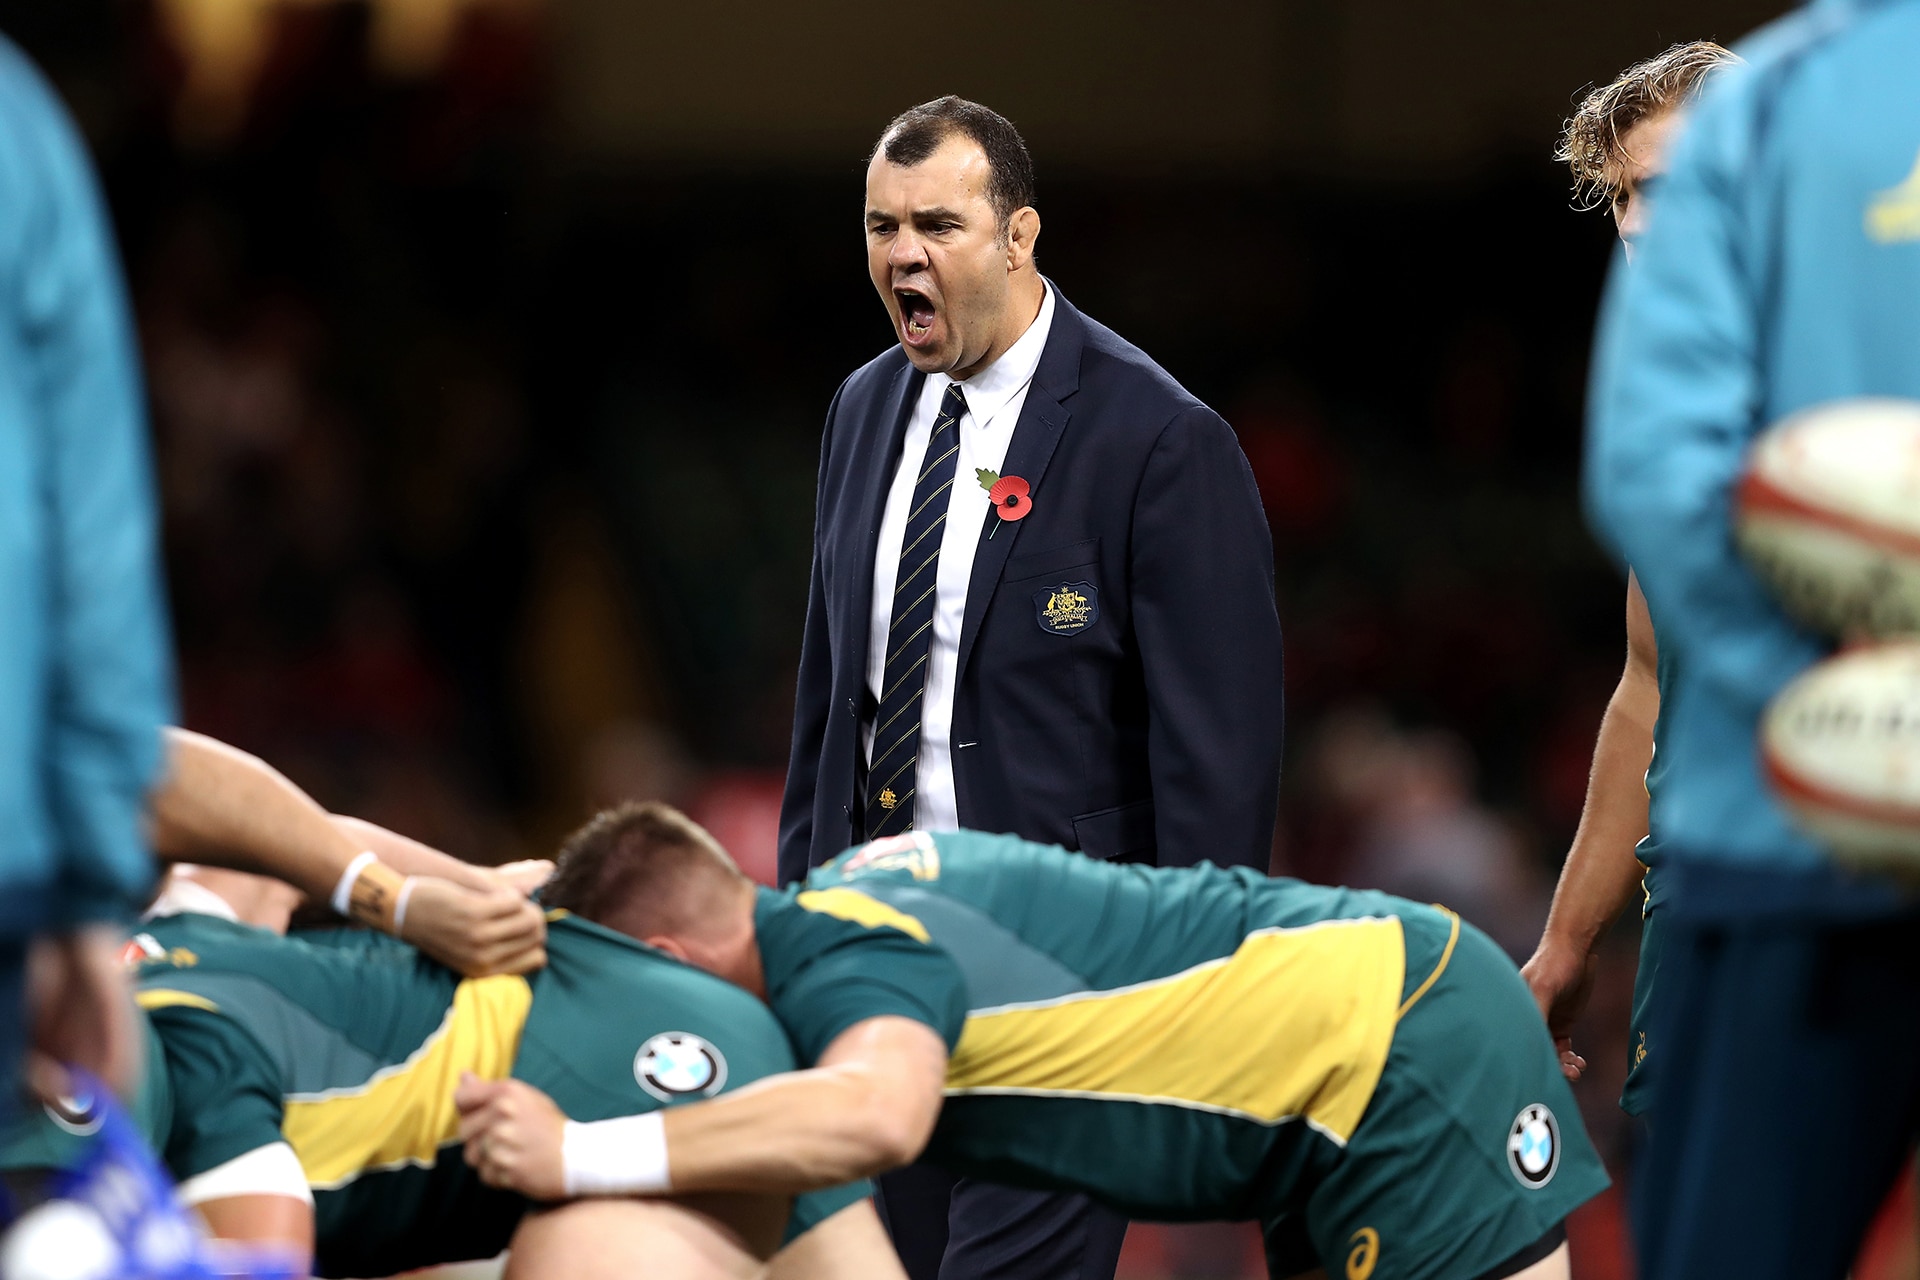 Michael Cheika On Folau, The Wallabies World Cup Hopes, And Harnessing Your Inner Fire For Good